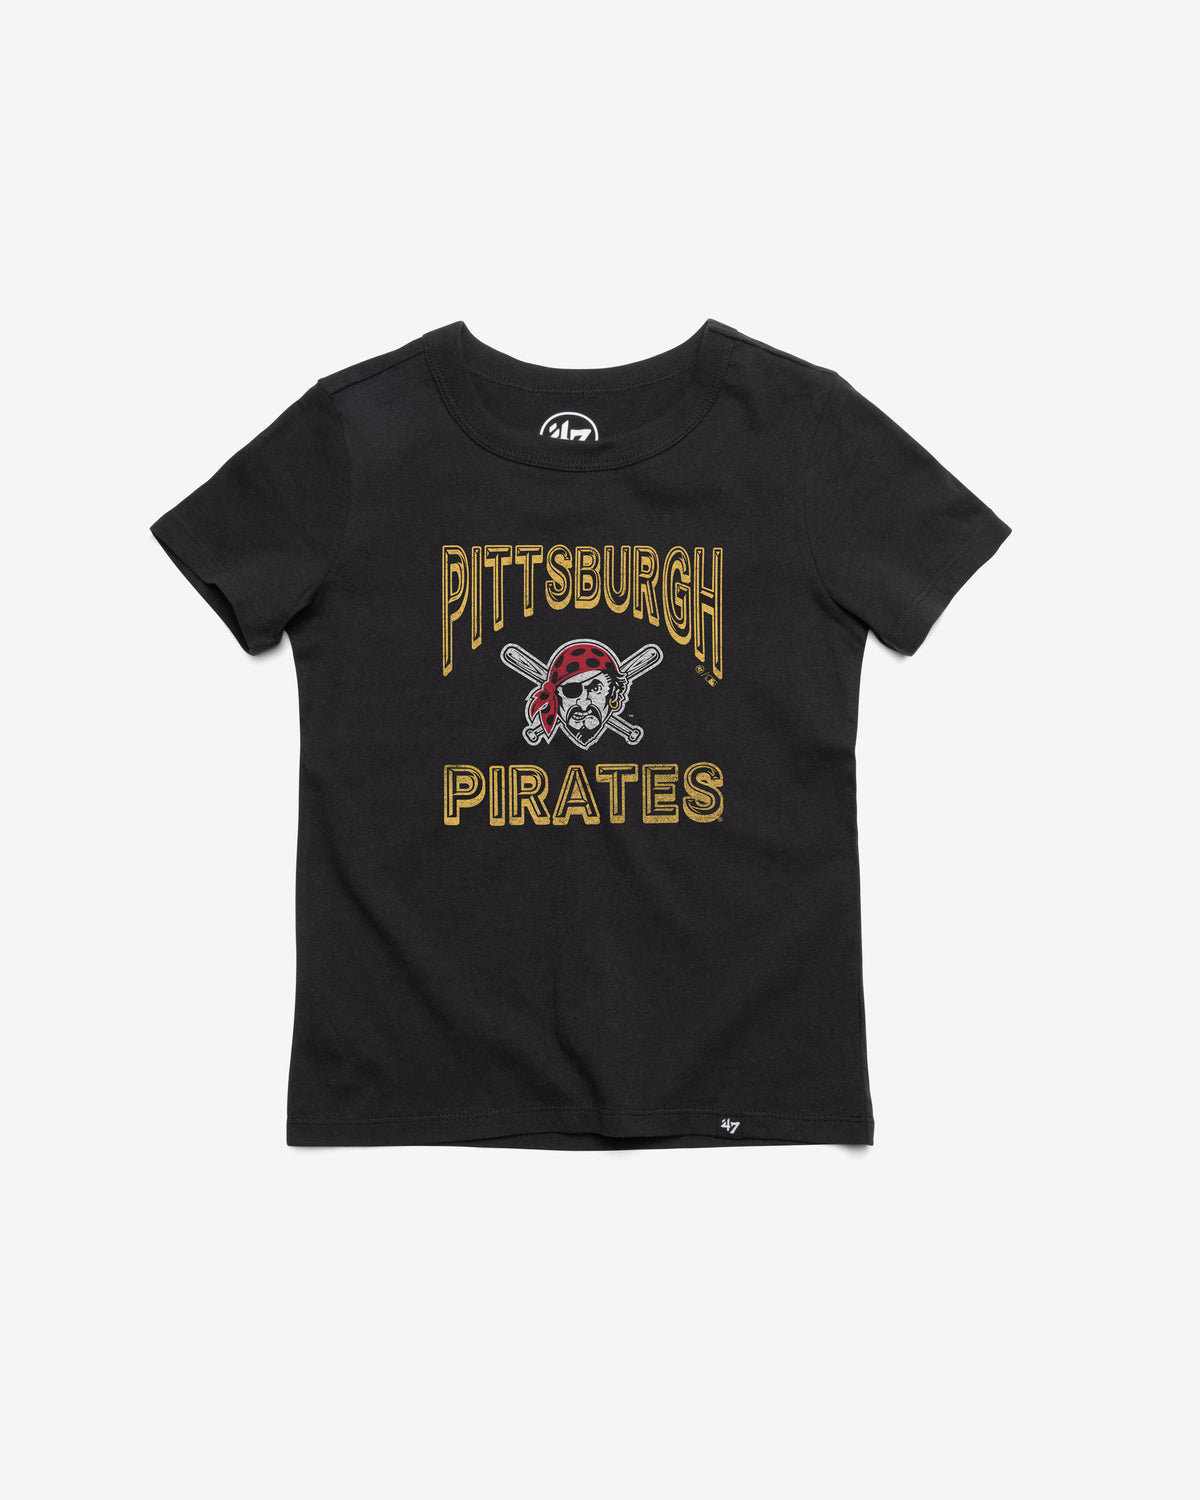 PITTSBURGH PIRATES FAN OUT '47 FRANKLIN TEE KIDS